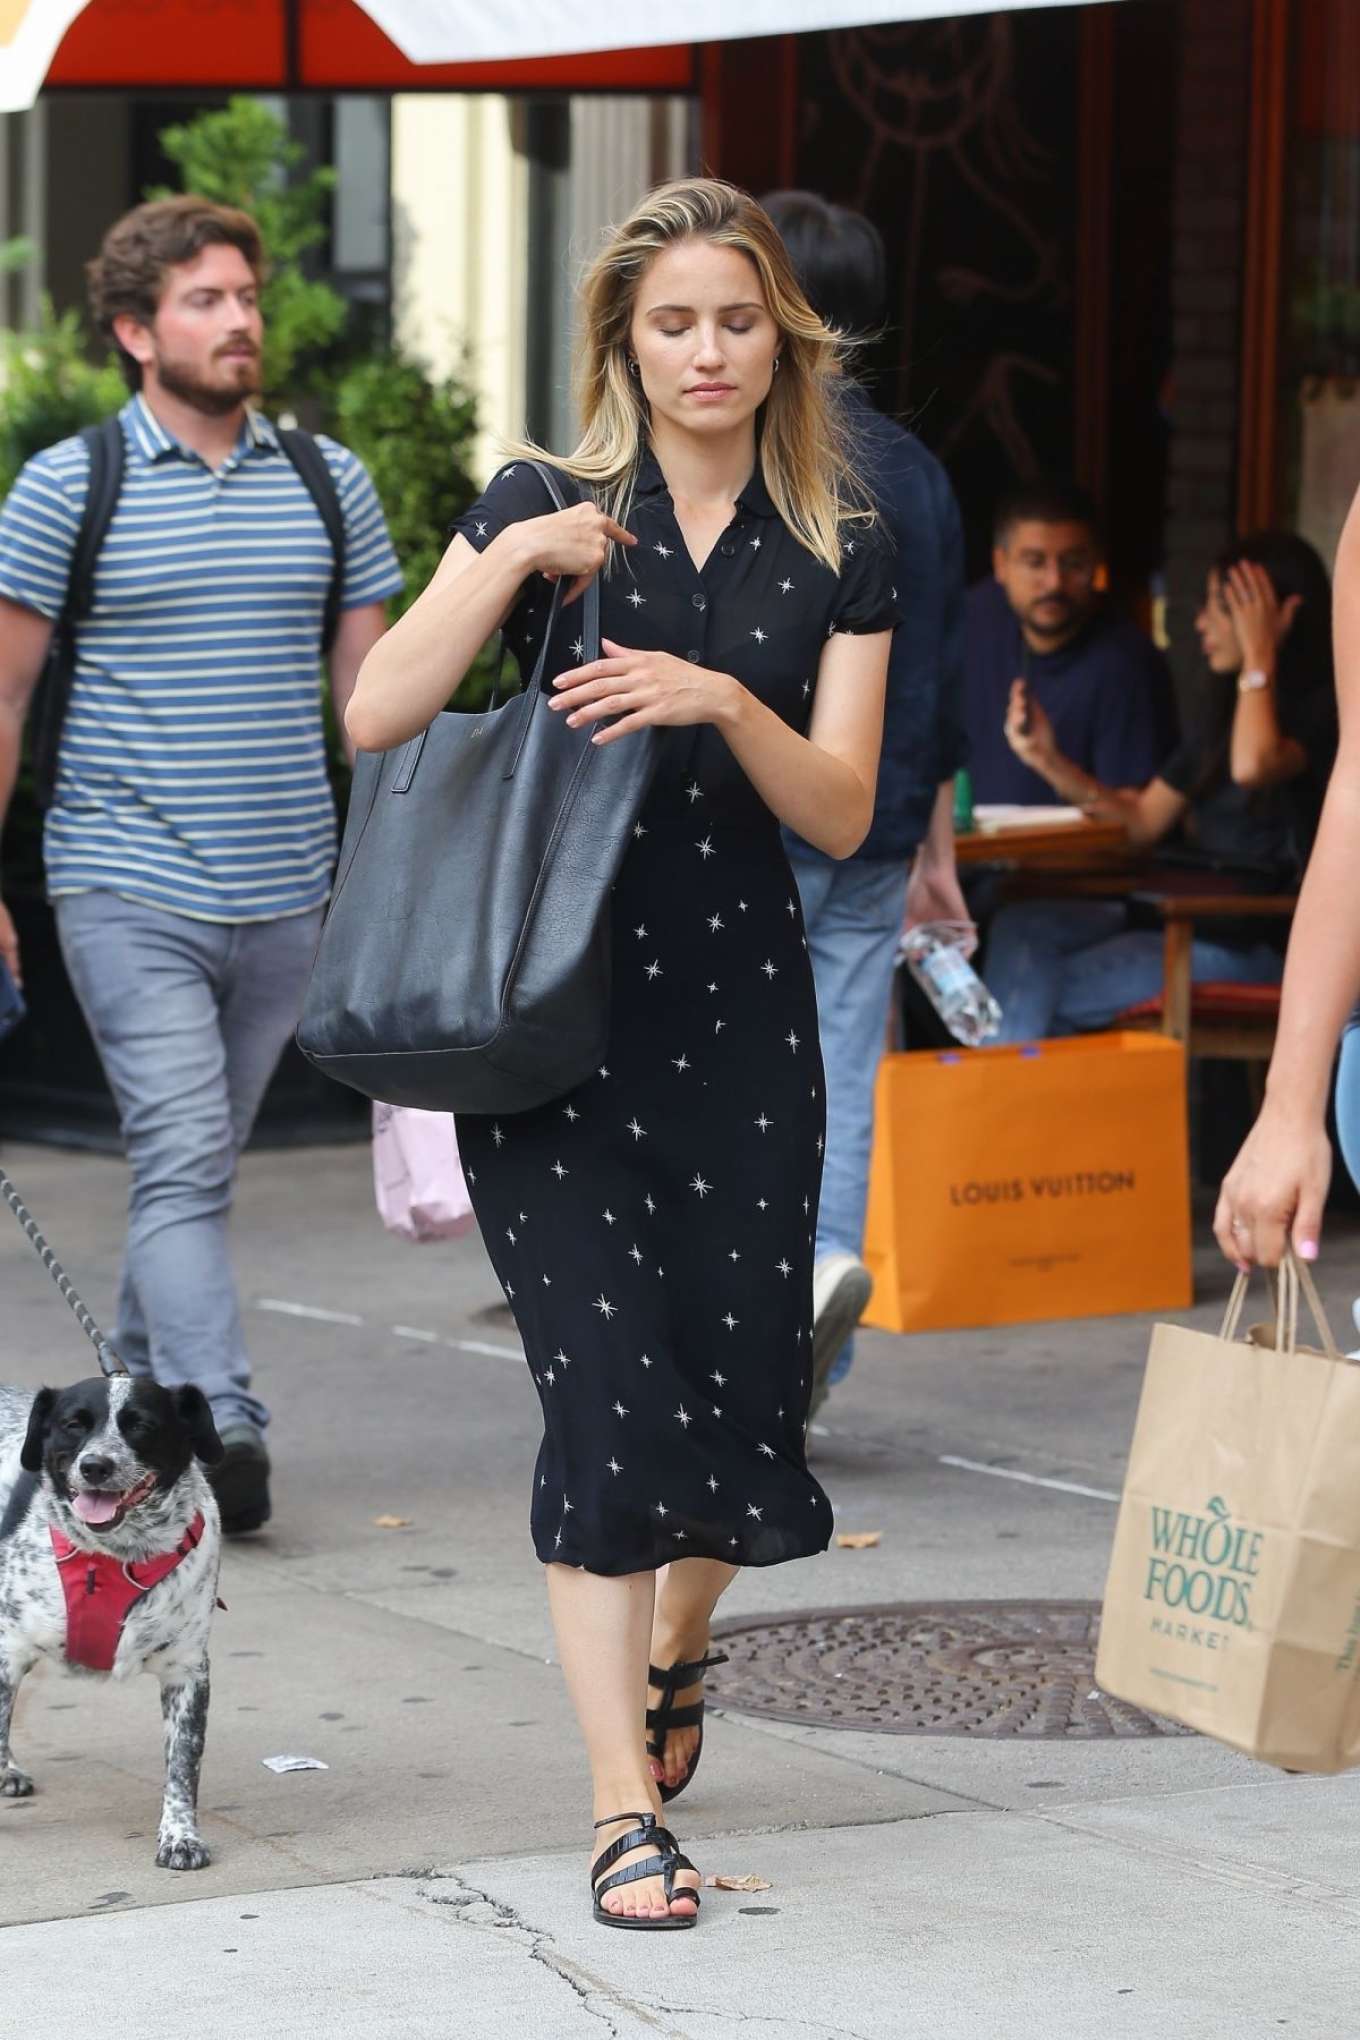 Dianna Agron â€“ Wears summer dress while out and About in New York